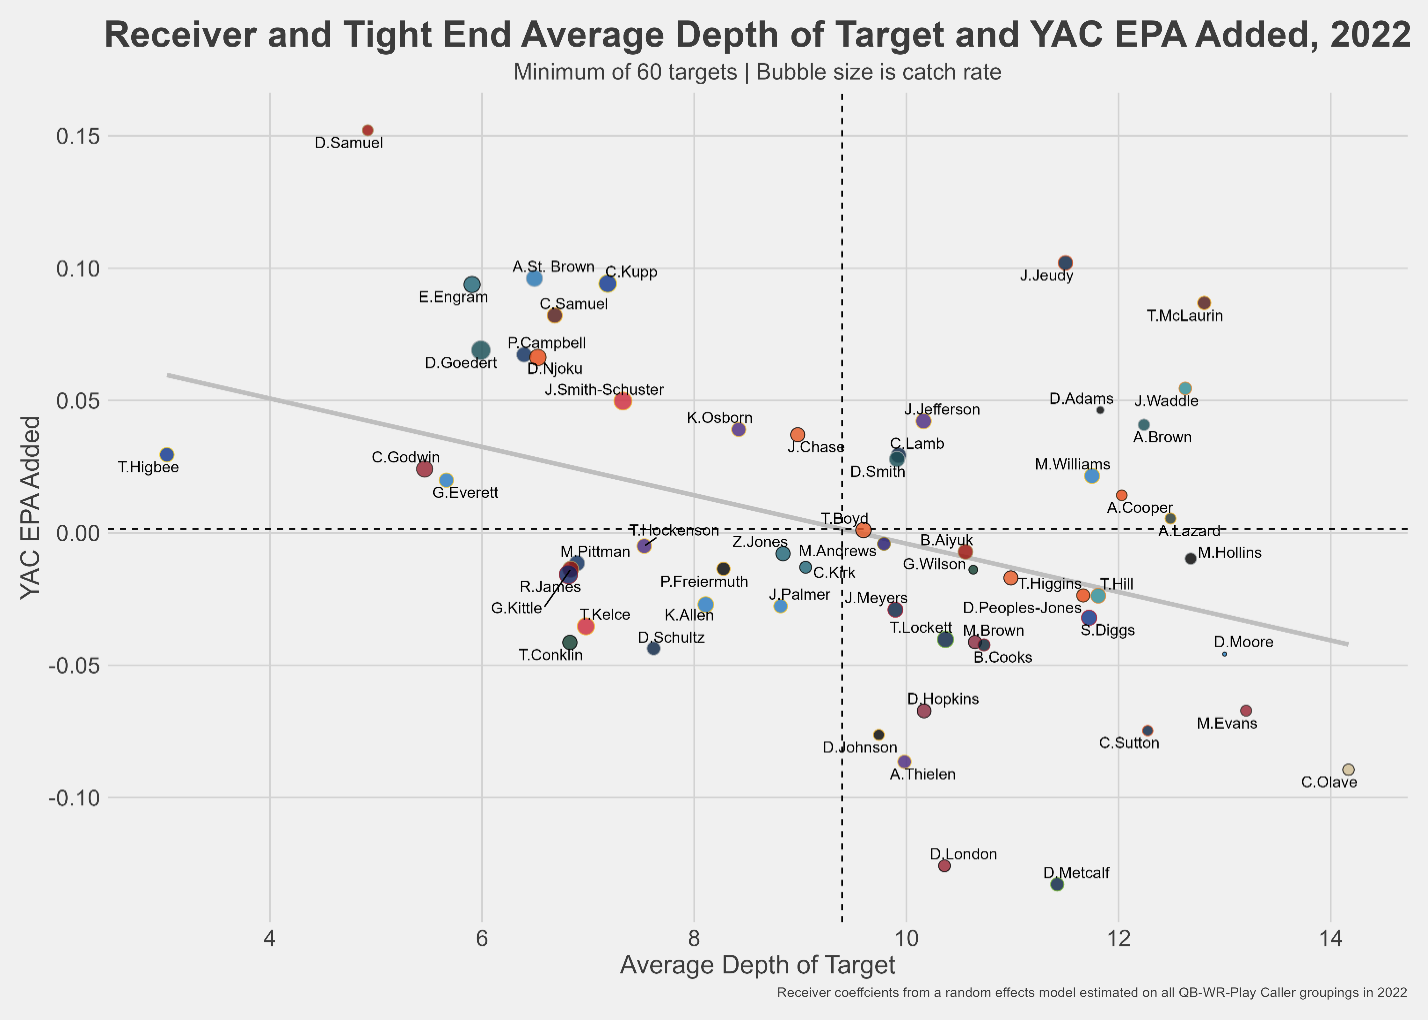 Chart: Receiver and Tight End Average Depth of Target and YAC EPA Added, 2022